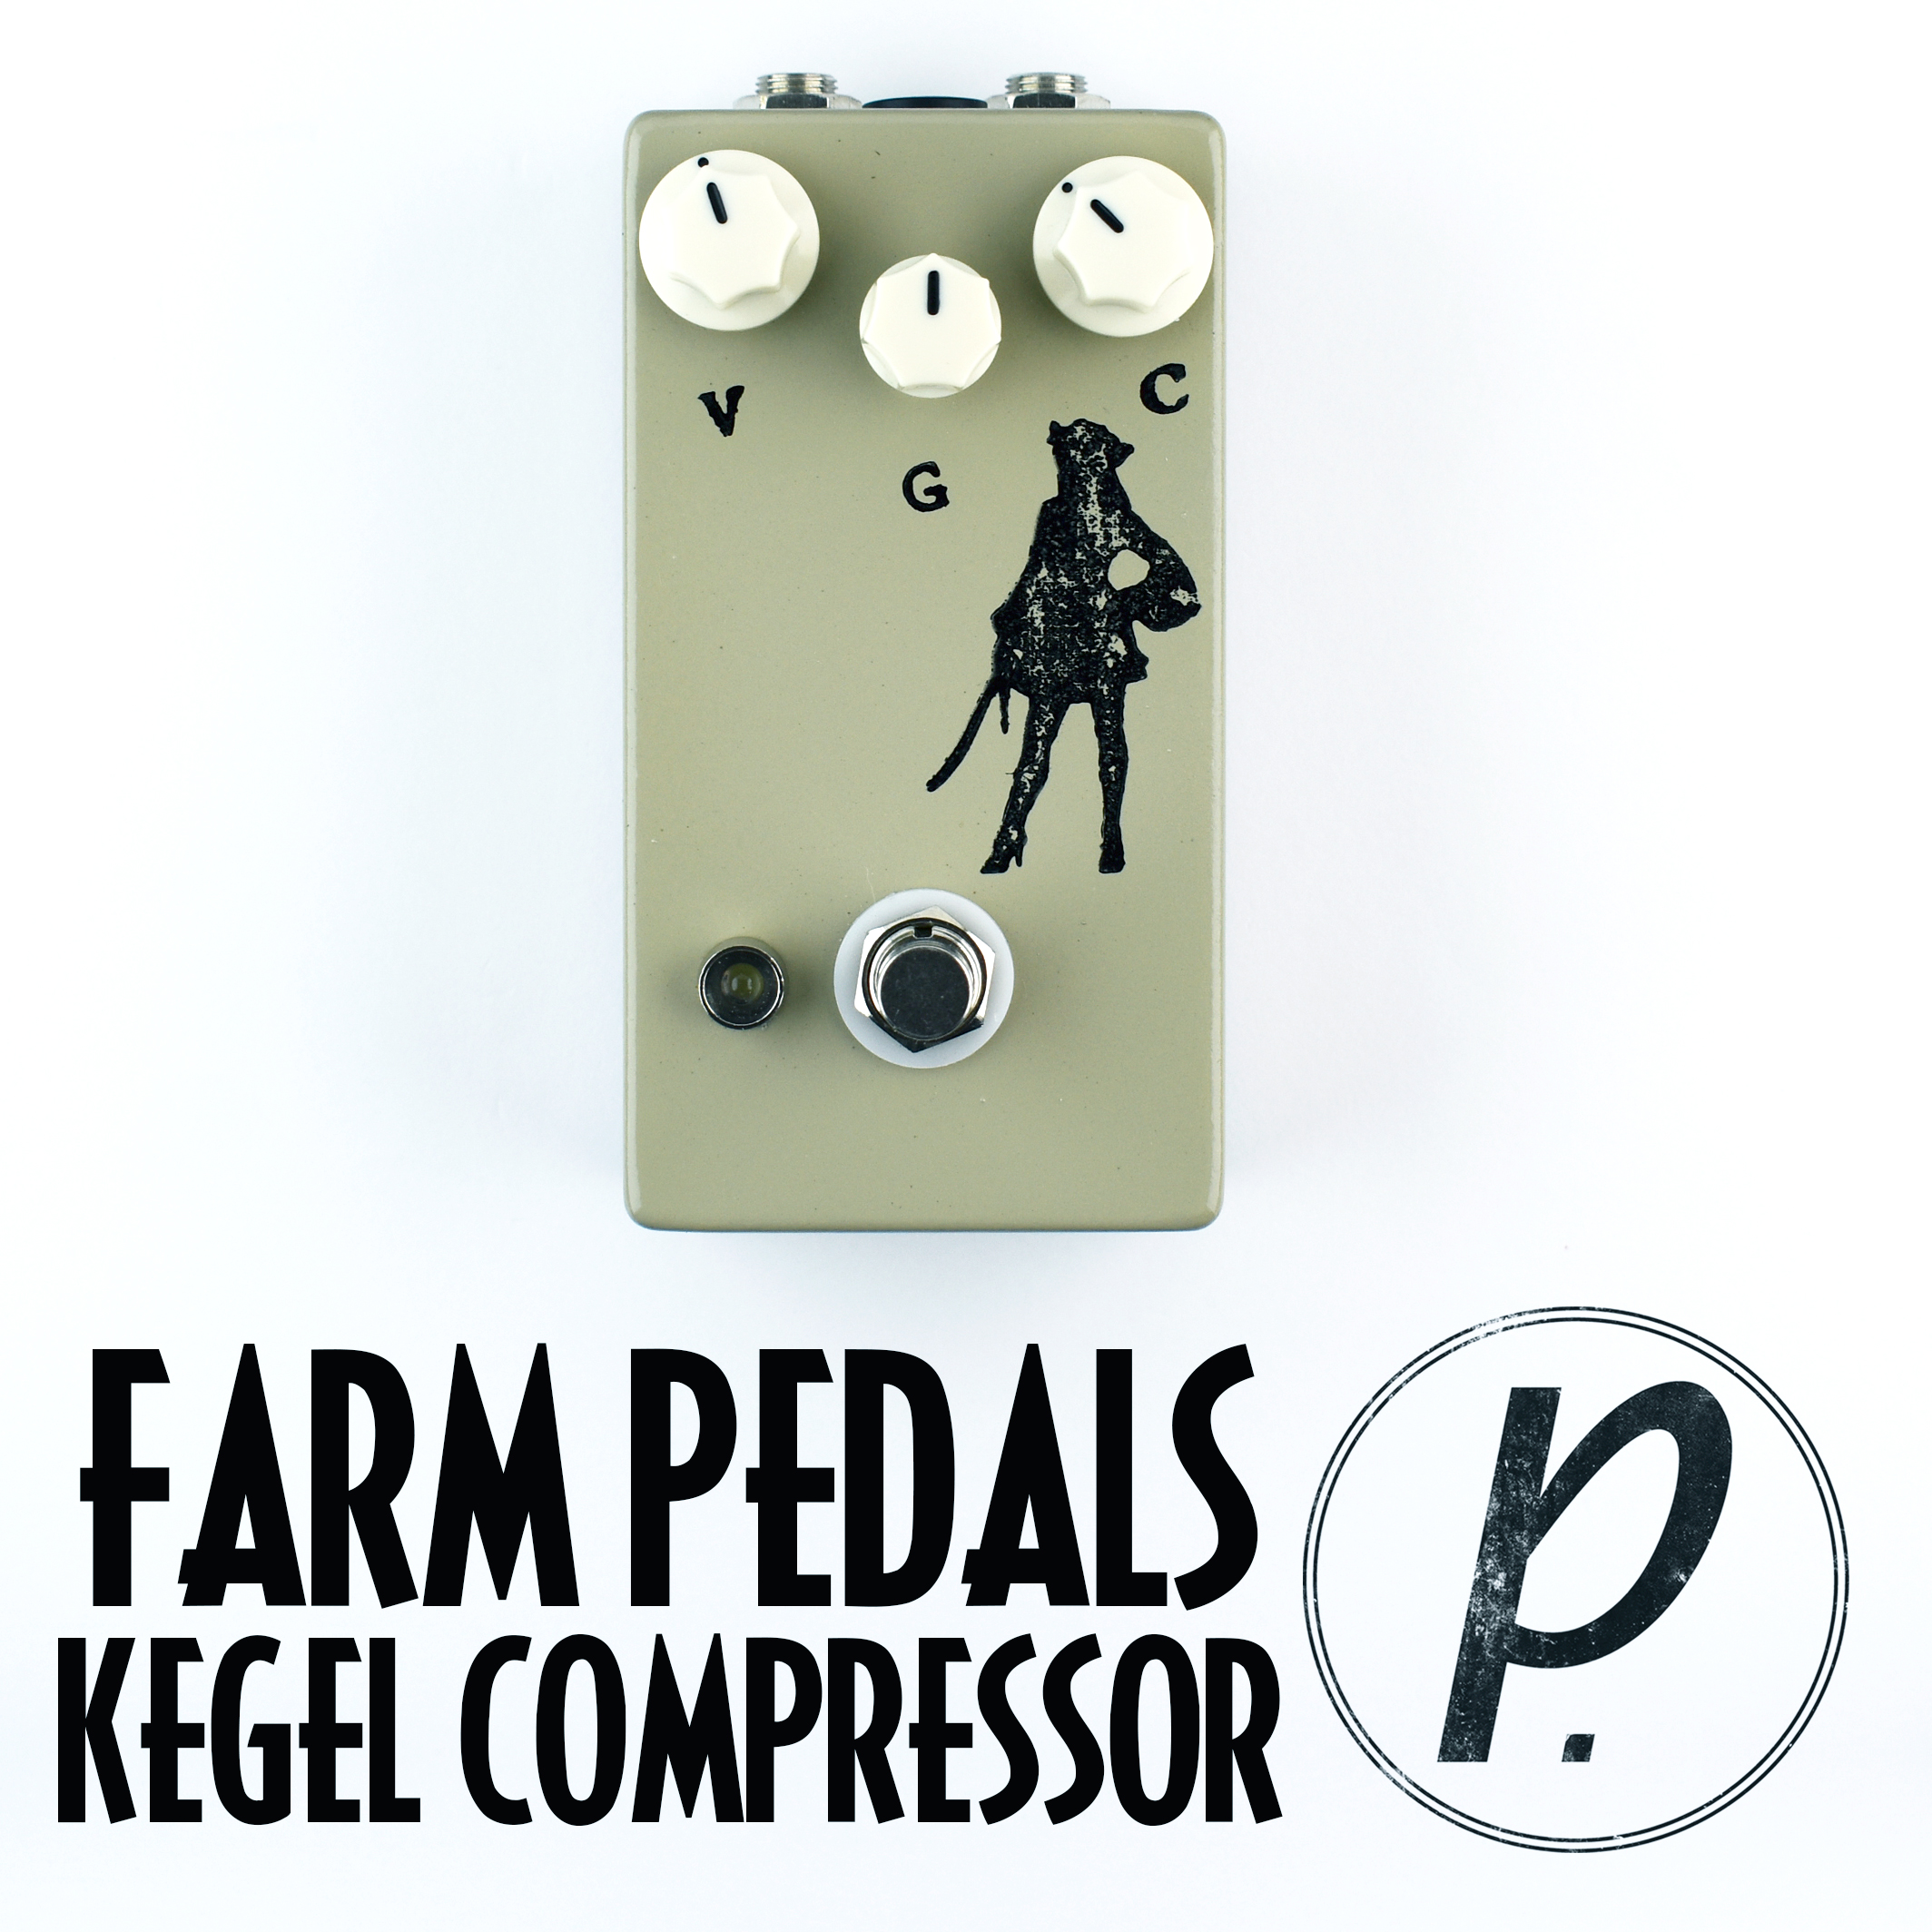 Farm Pedals Kegel Compressor - Pedal of the Day